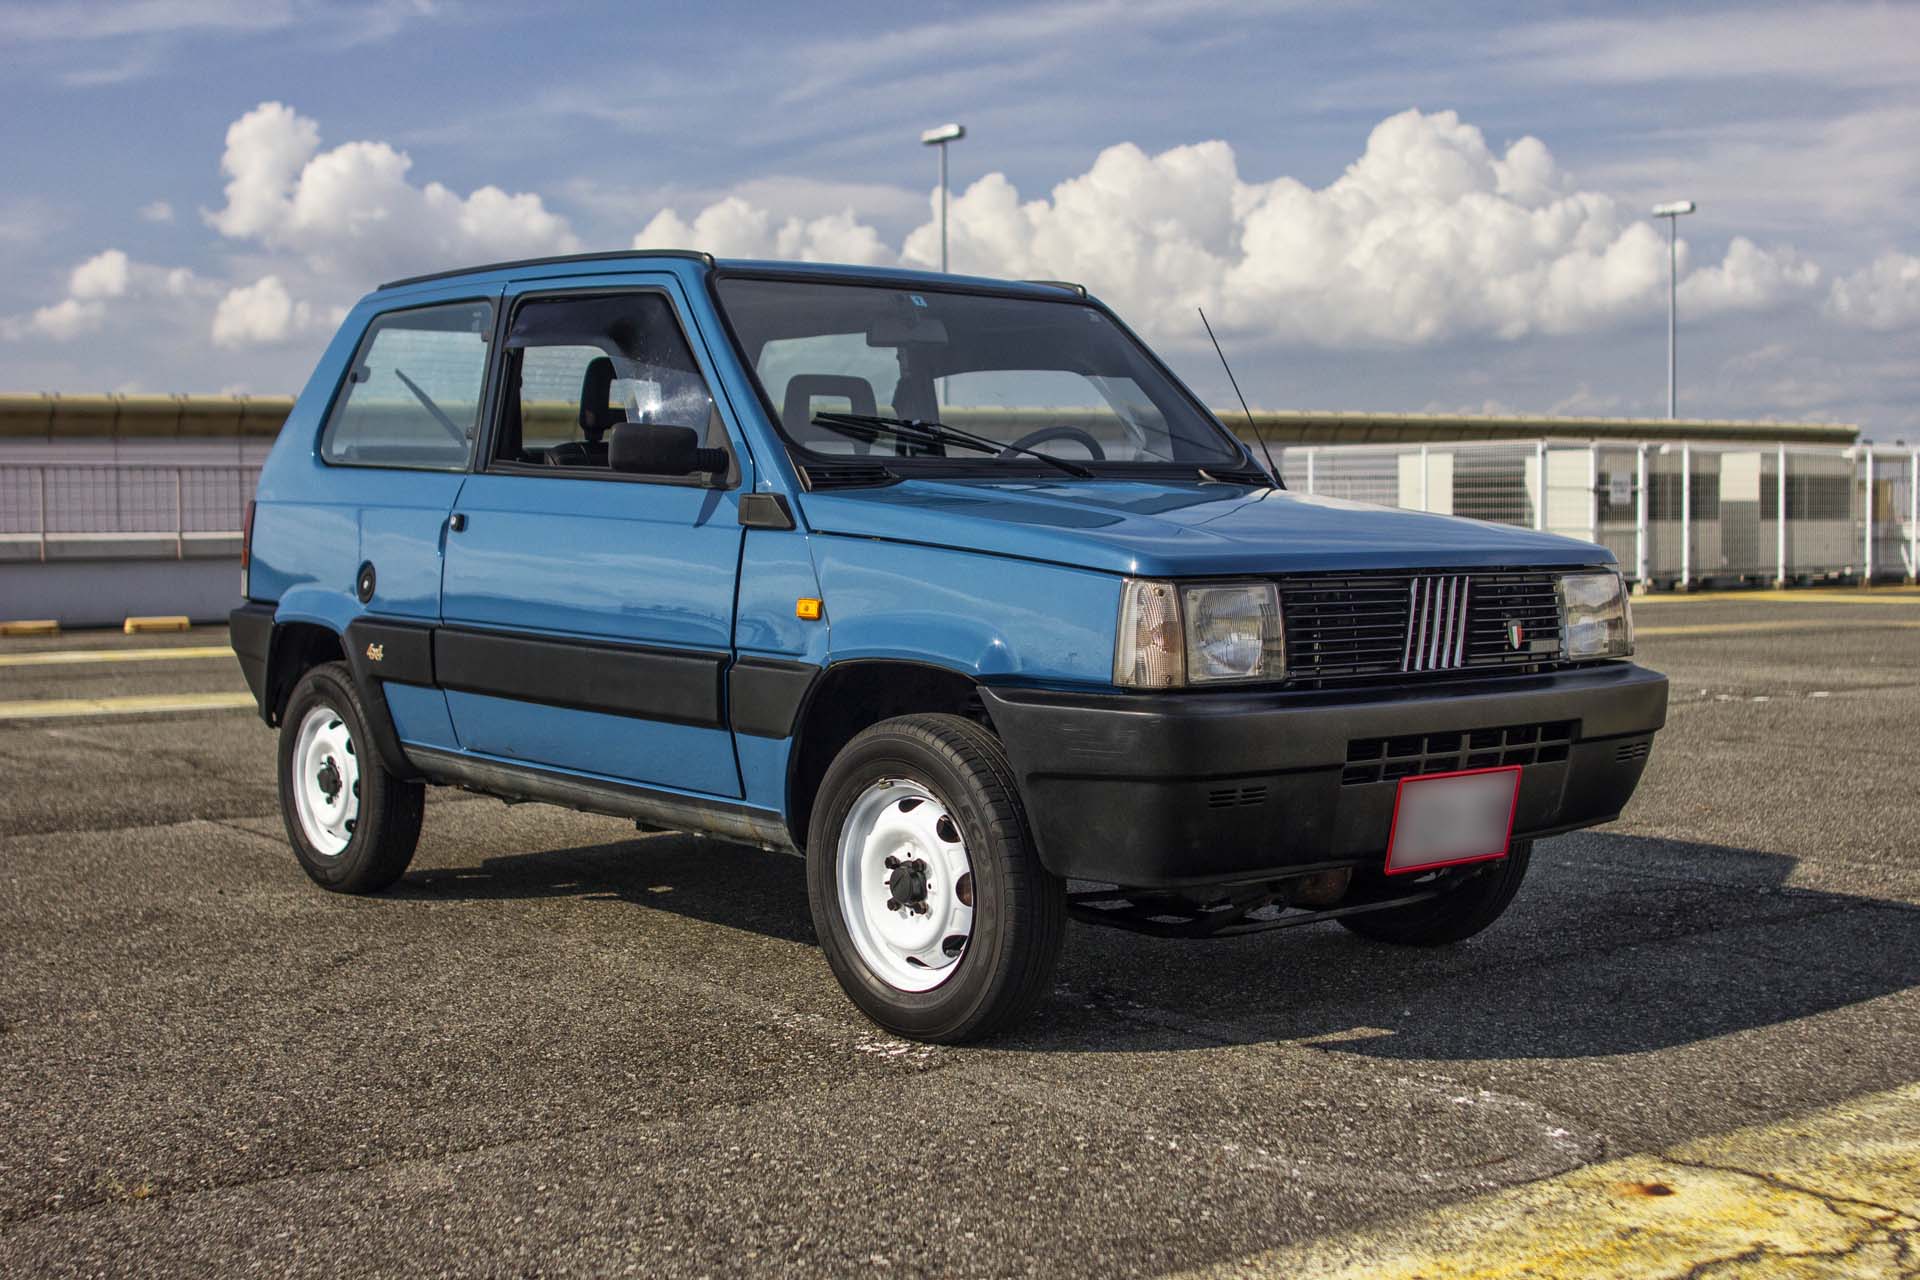 Does the U.S. Need the Next Fiat Panda?